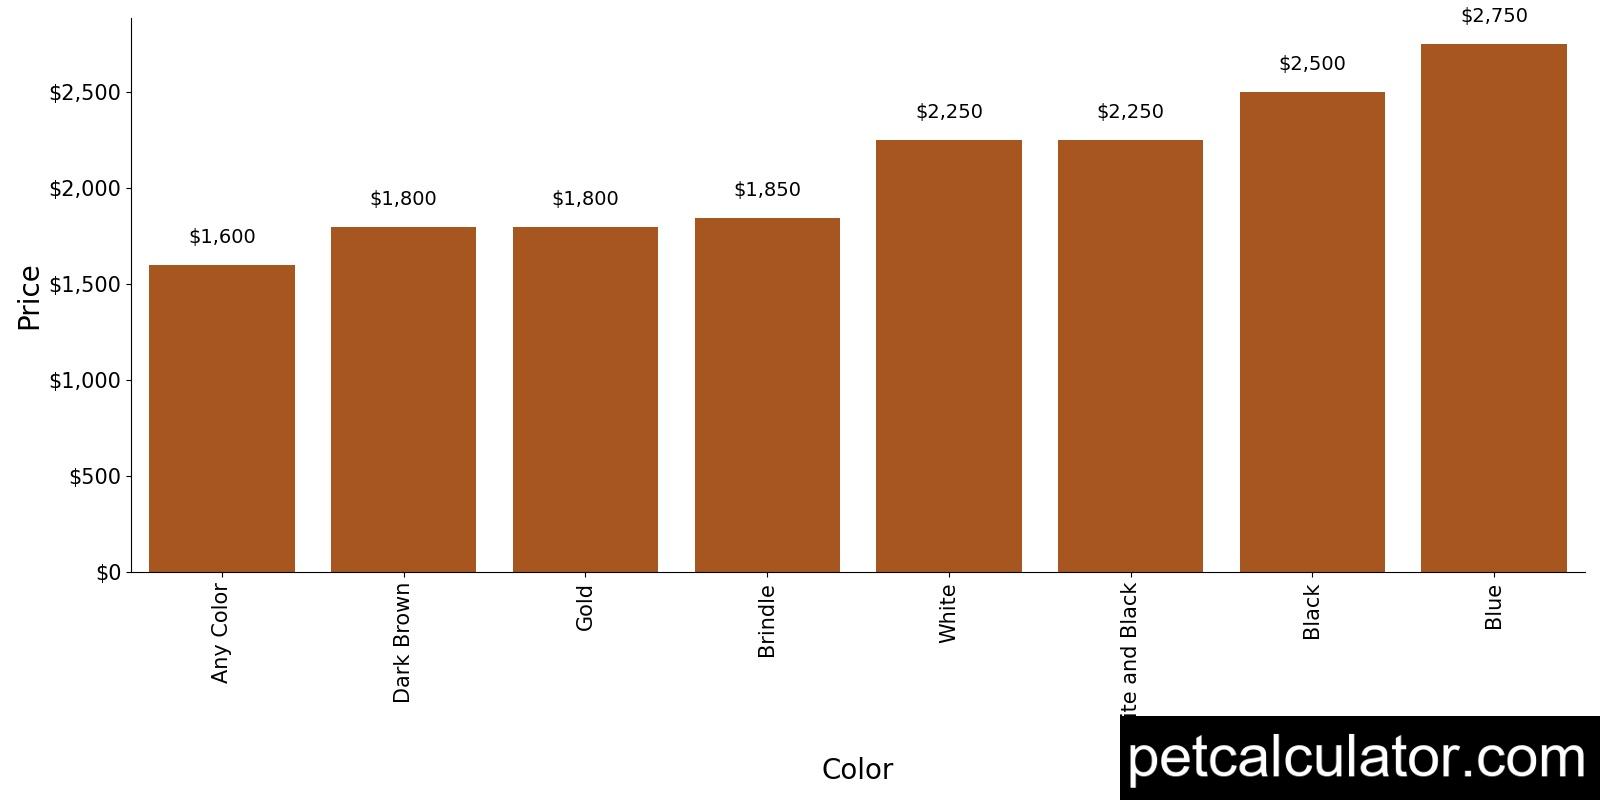 Price of Staffordshire Bull Terrier by Color 